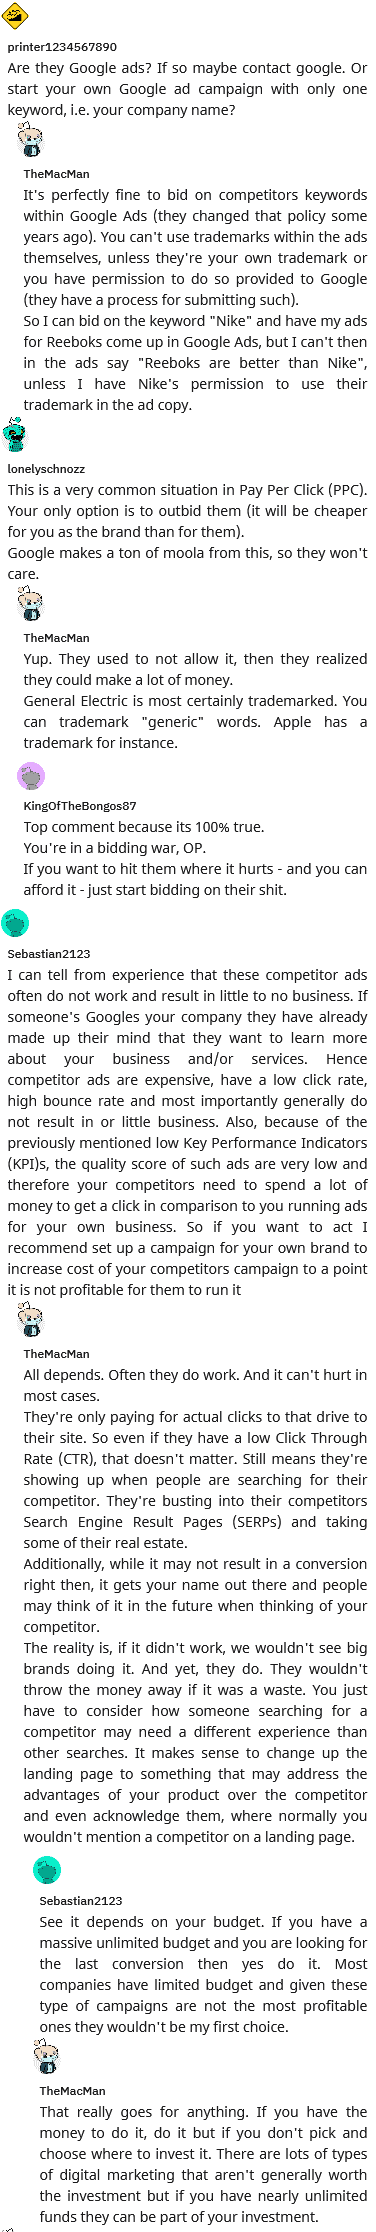 a competitor using your company name for their ads you should bid a war within google ads